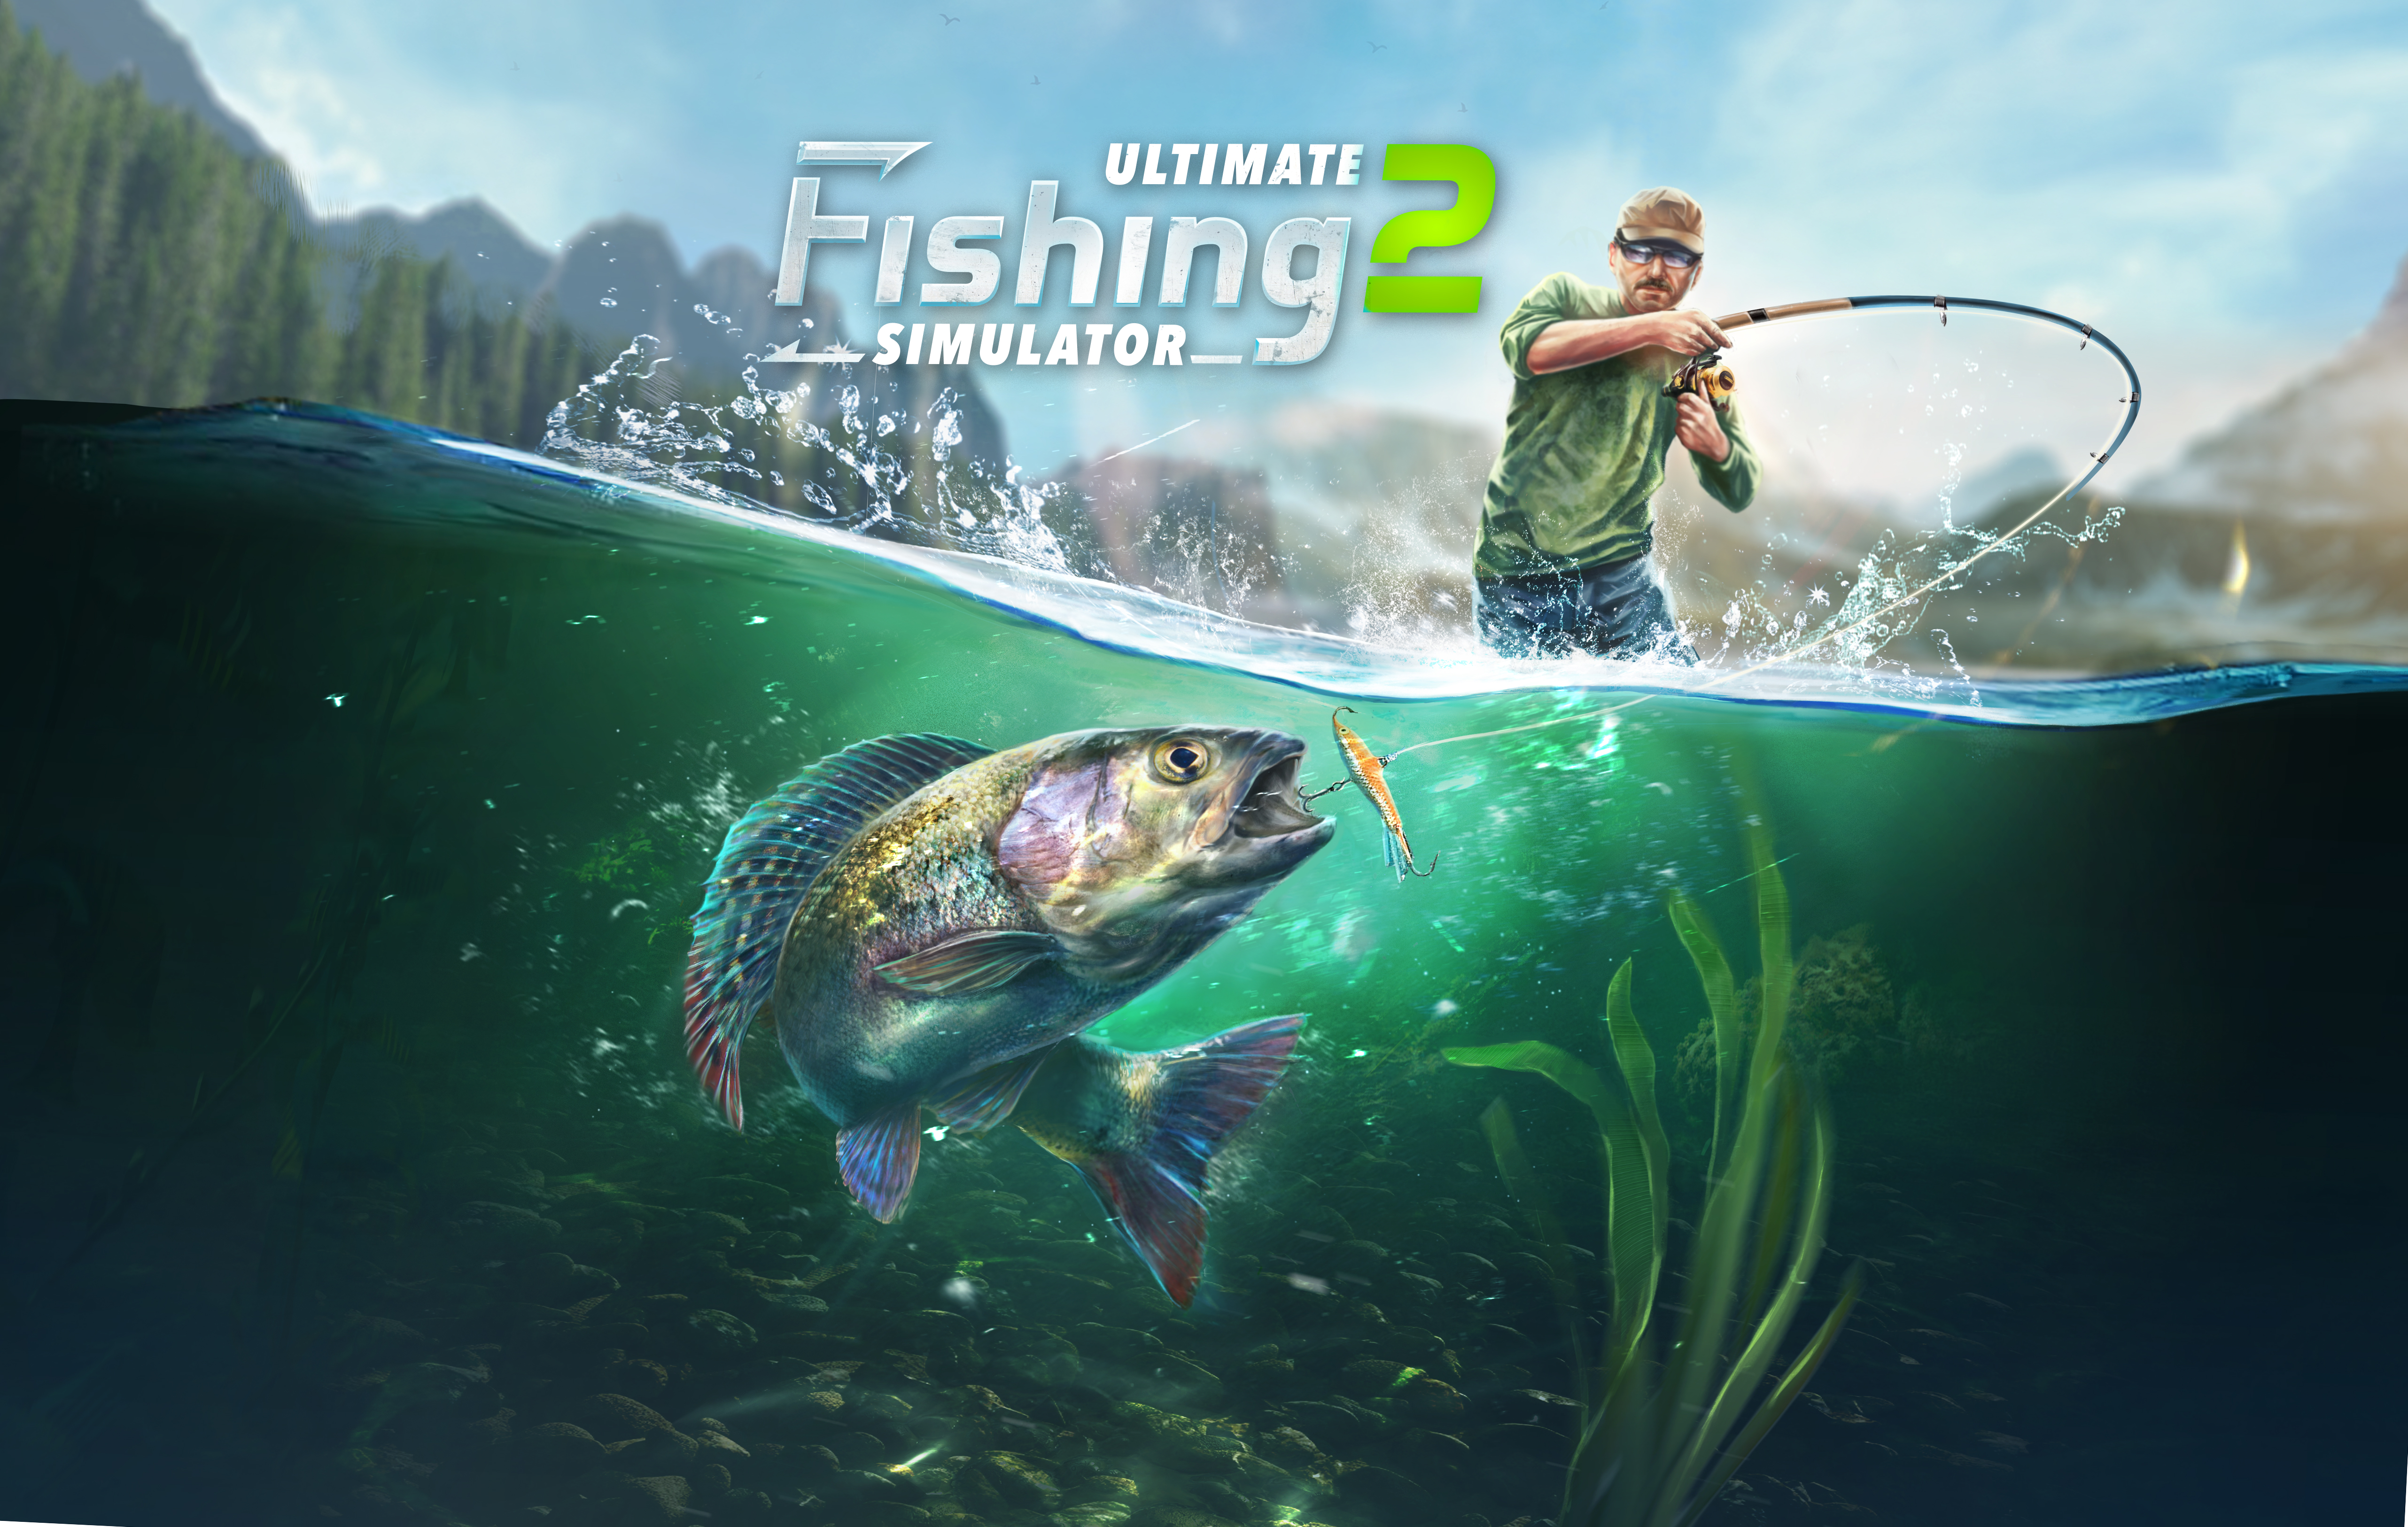 Ultimate Fishing Simulator 2 set to release next year